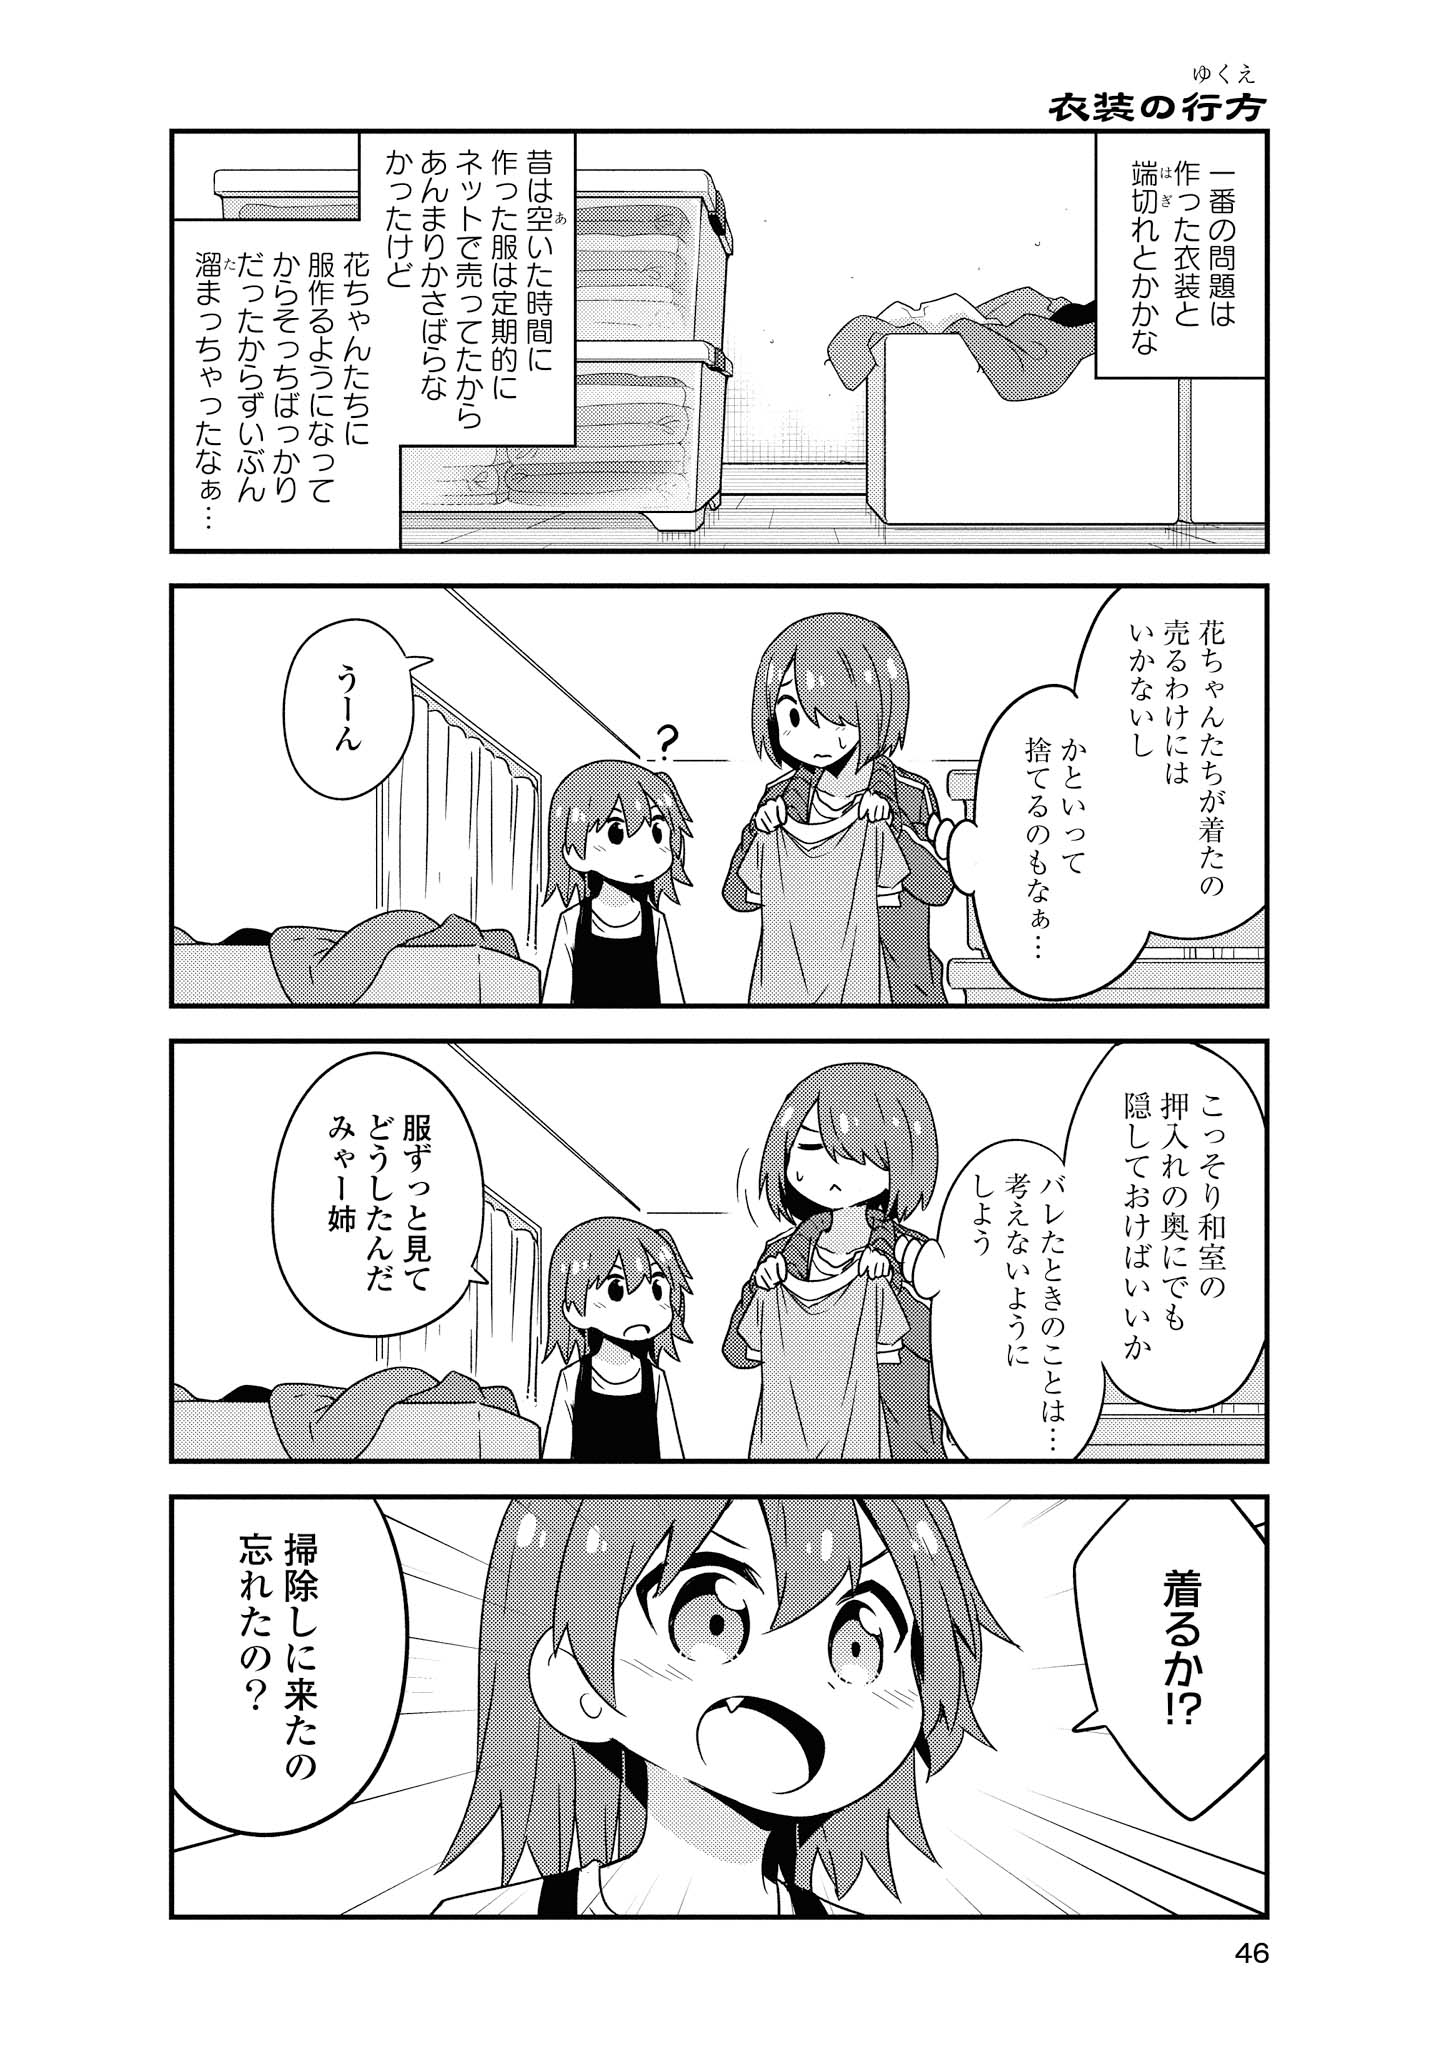 Wataten! An Angel Flew Down to Me 私に天使が舞い降りた！ 第46話 - Page 4